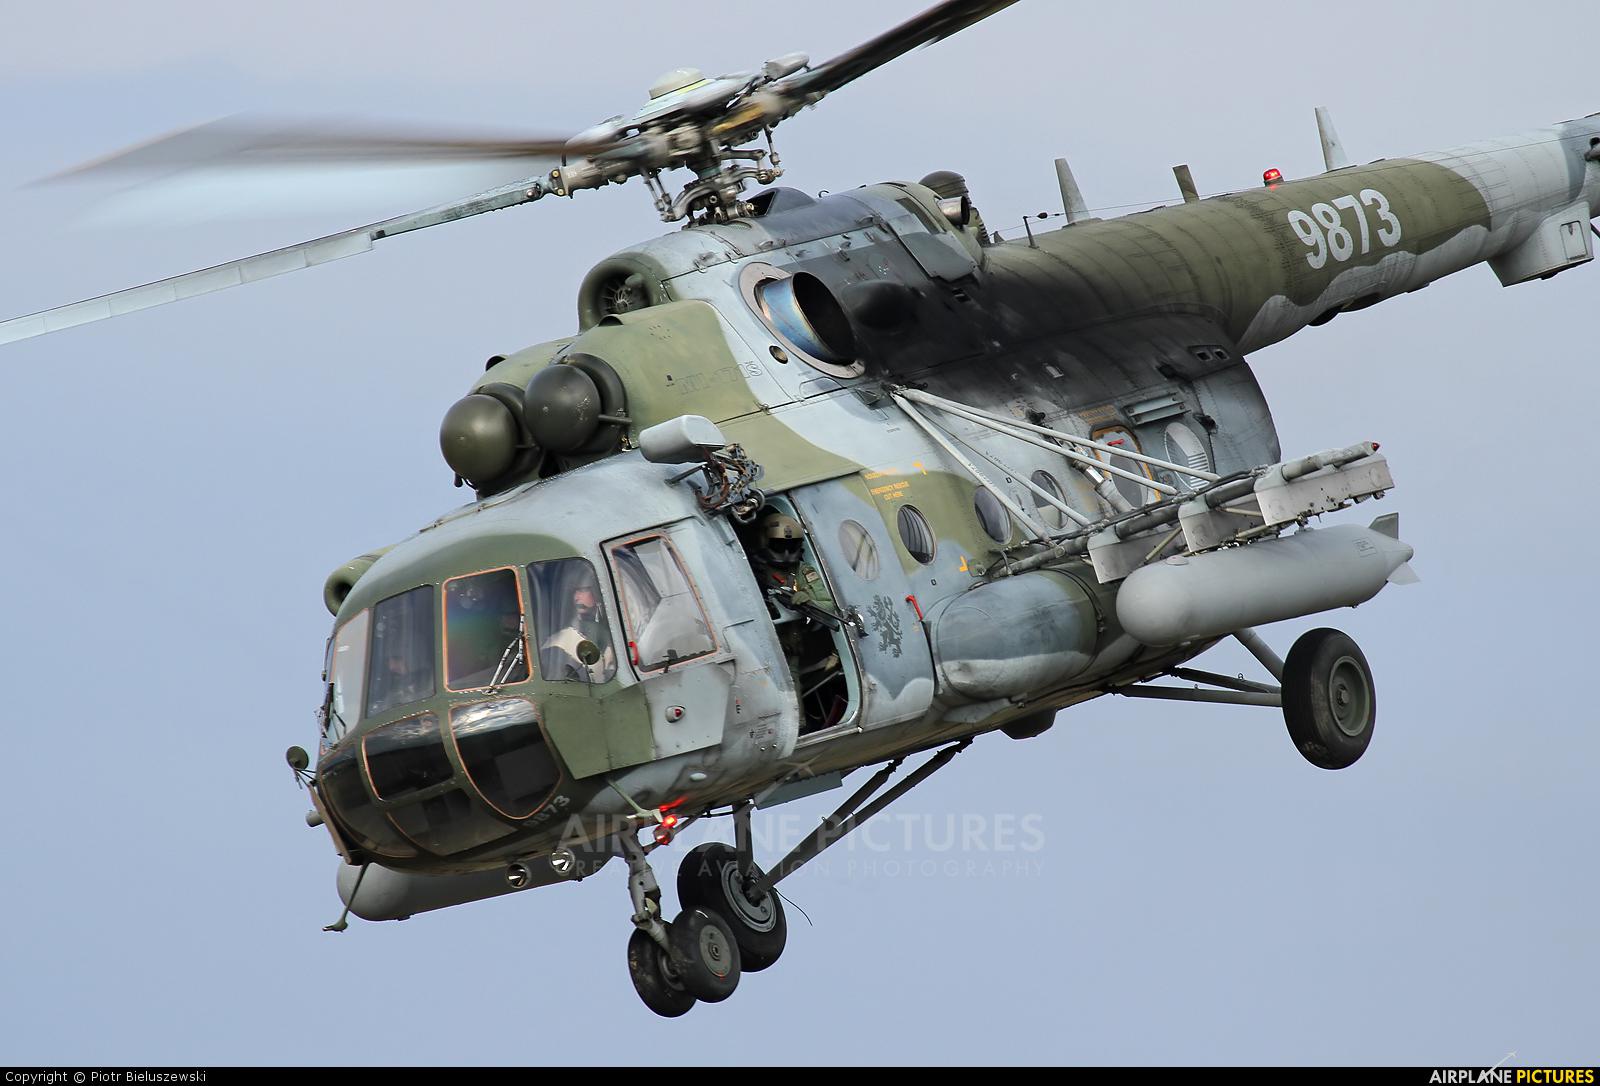 ifmat - Rosoboronexport Signed a contract to sell Mi-171 helicopters to Iran,